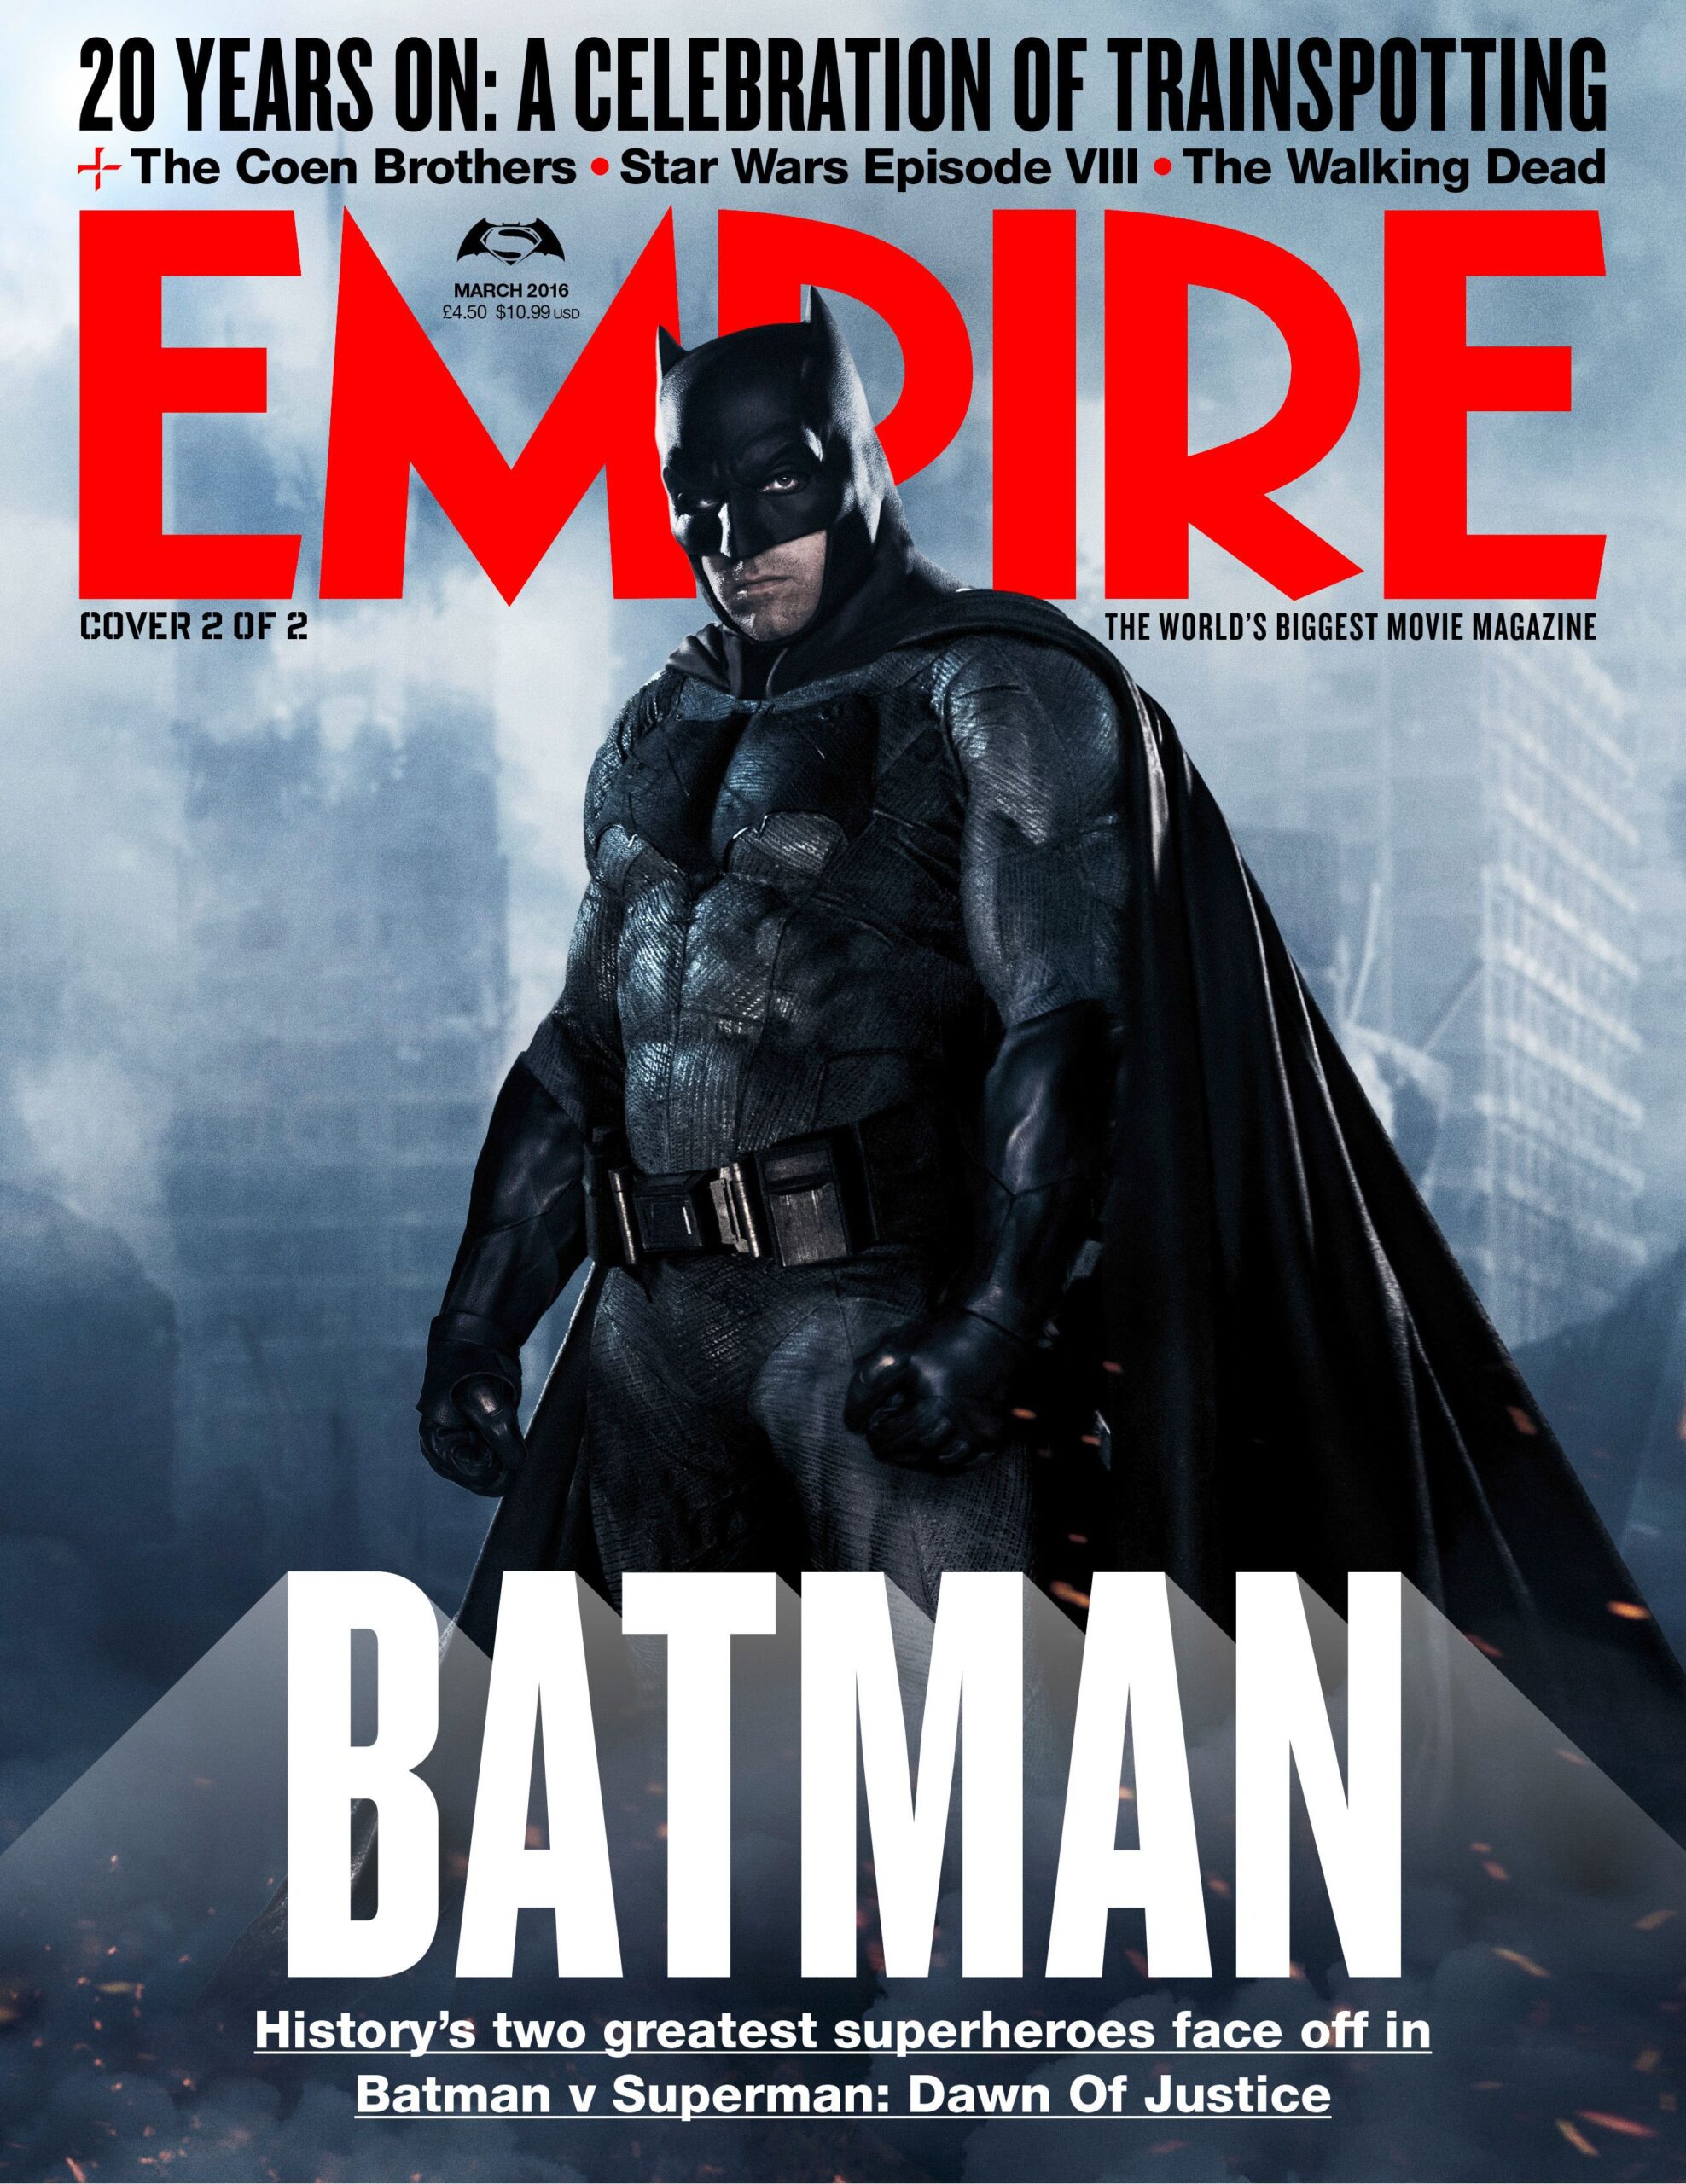 Batman cover for the March issue of Empire Magazine